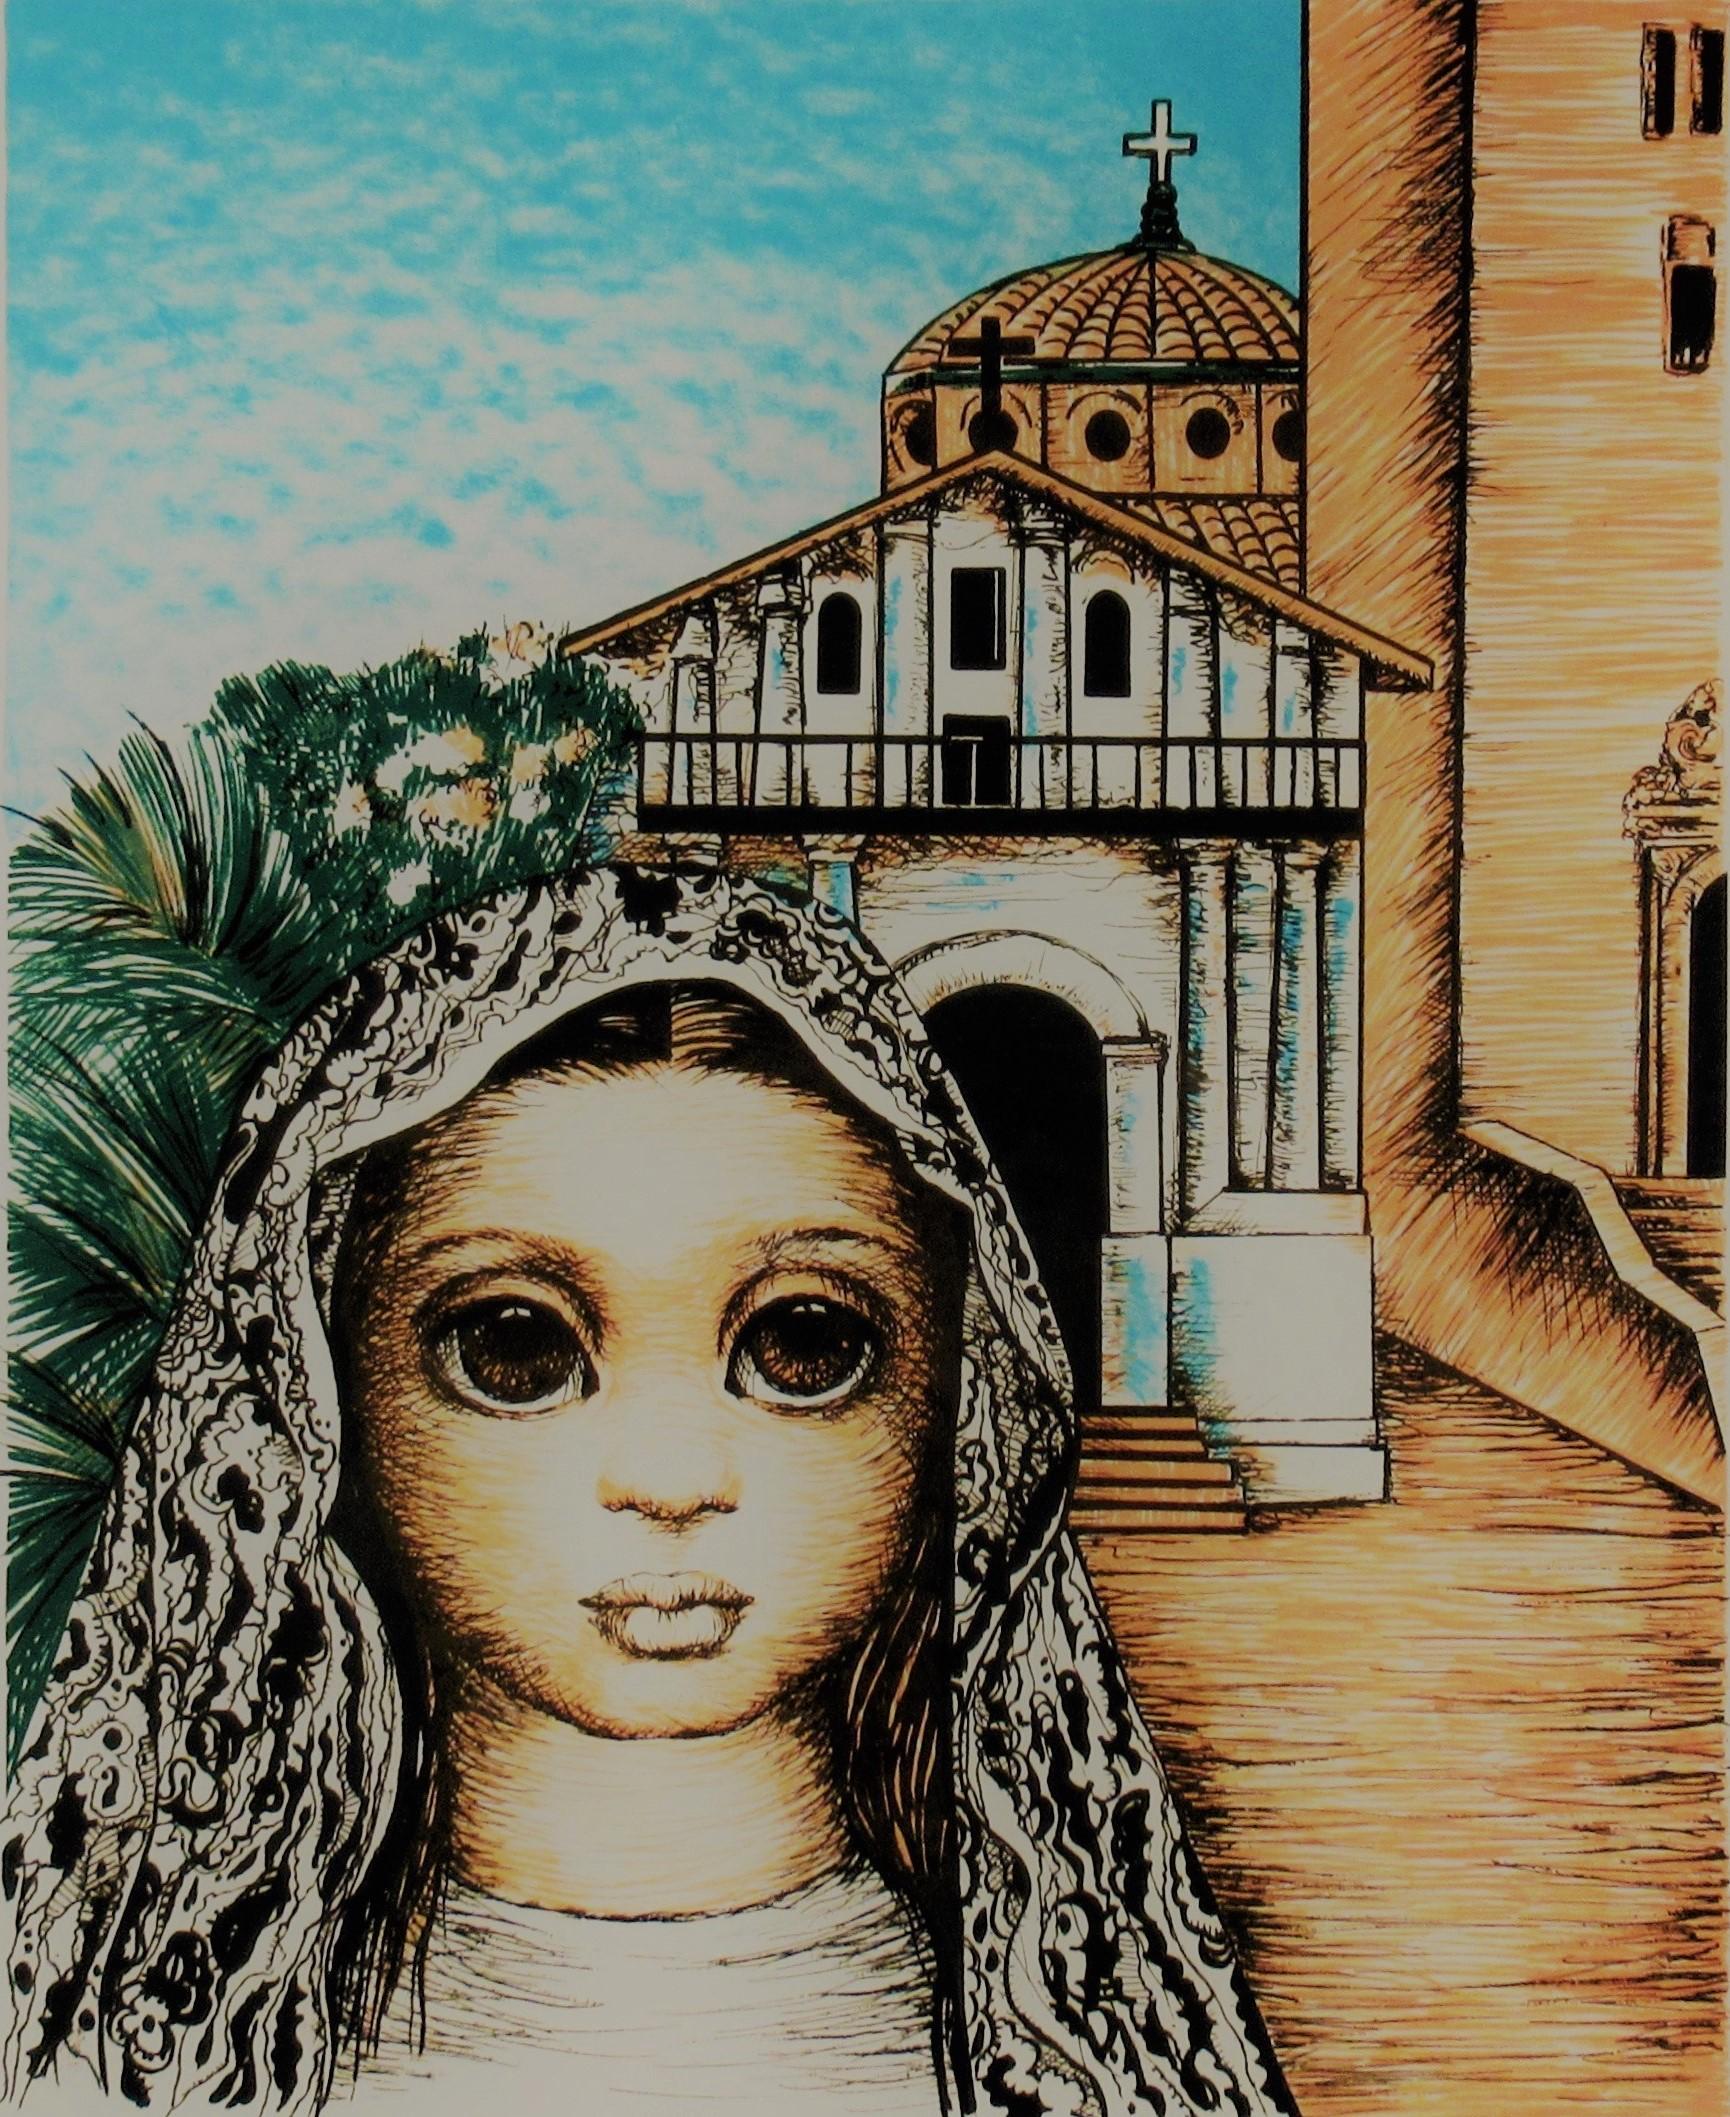 San Francisco, Girl with Mission Dolores - Print by Margaret Keane